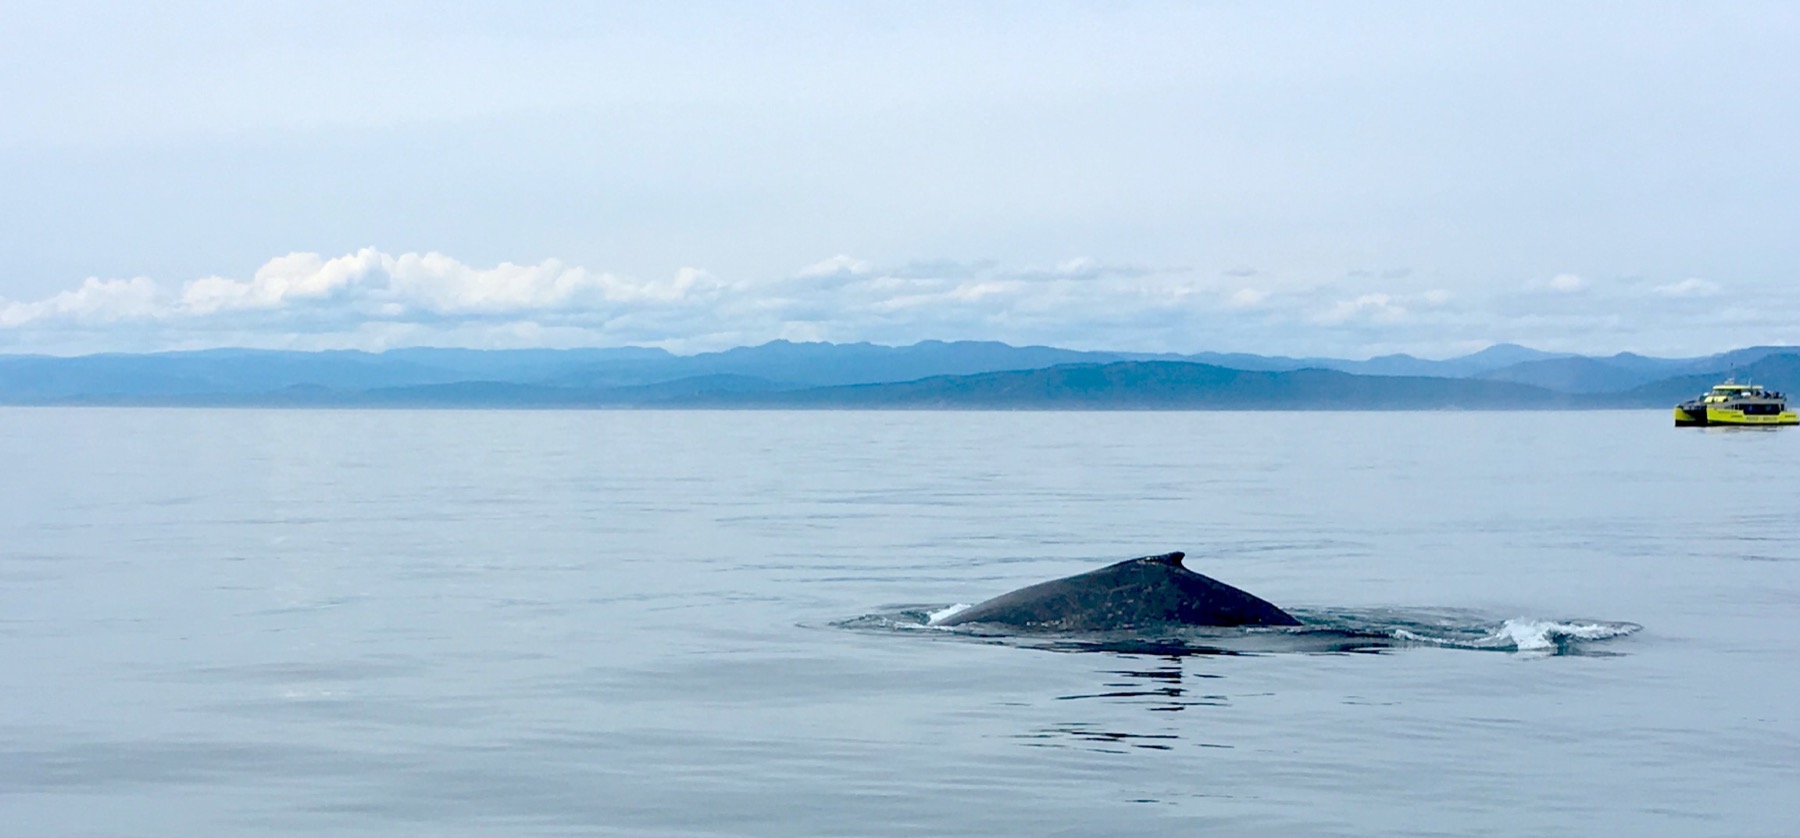 One of the four humpback whales we encountered!